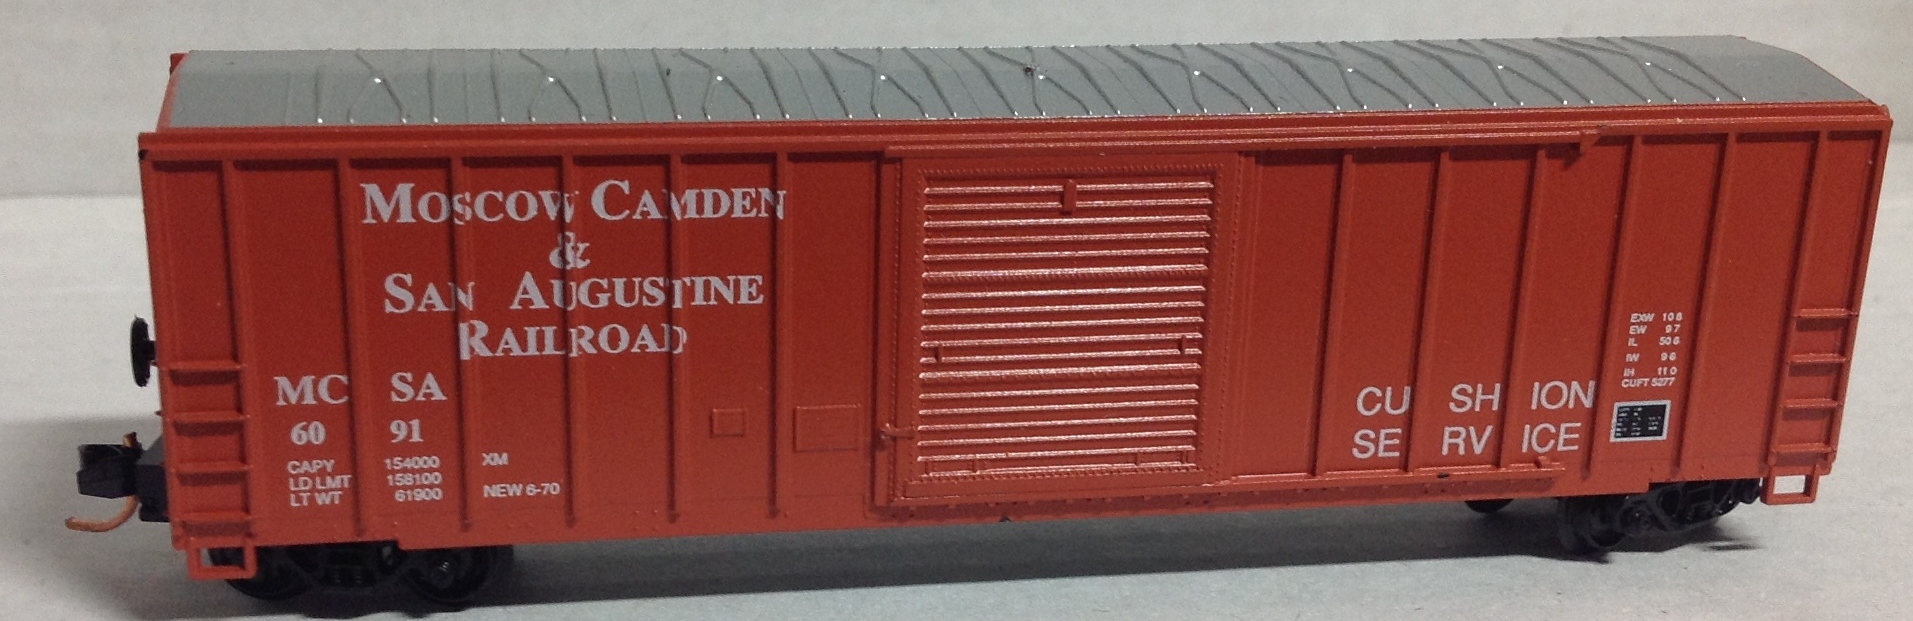 N Scale - Roundhouse - 8858 - Boxcar, 50 Foot, FMC, 5347 - Moscow Camden & San Augustine - 6091